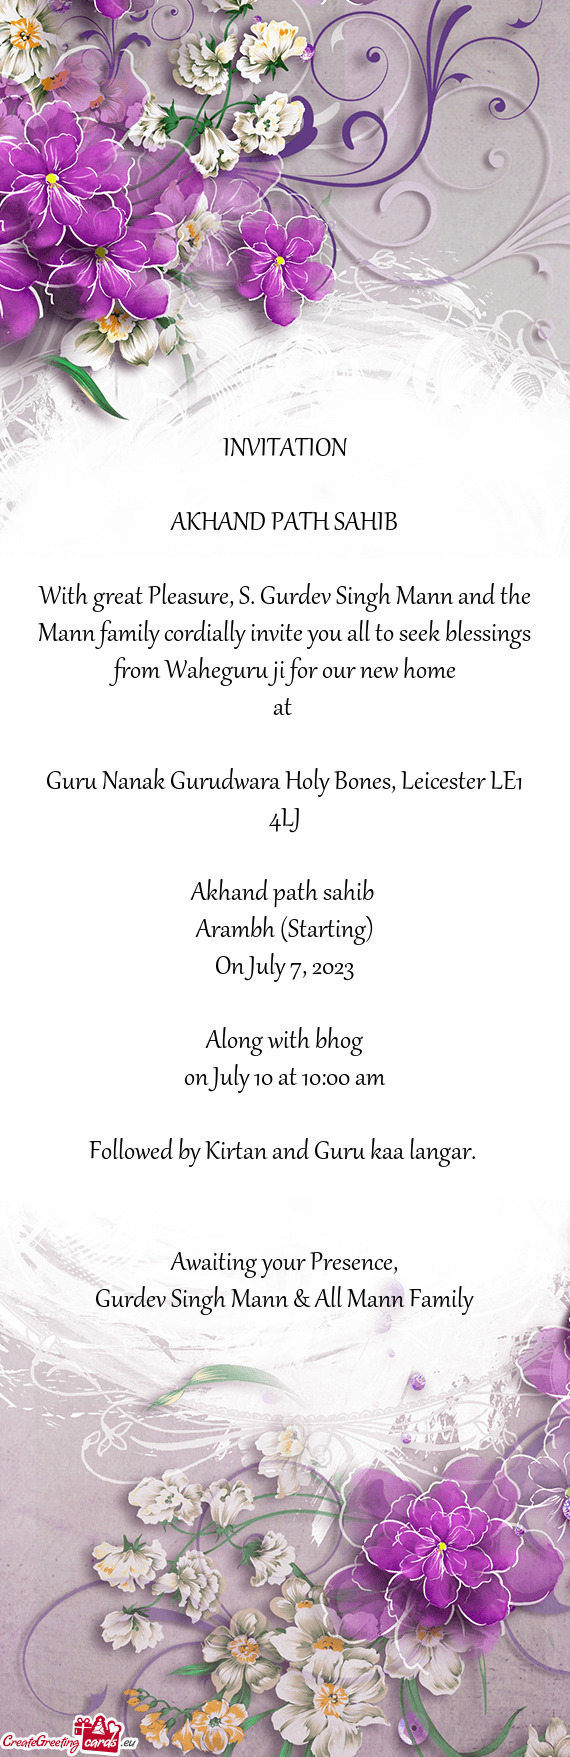 With great Pleasure, S. Gurdev Singh Mann and the Mann family cordially invite you all to seek bless